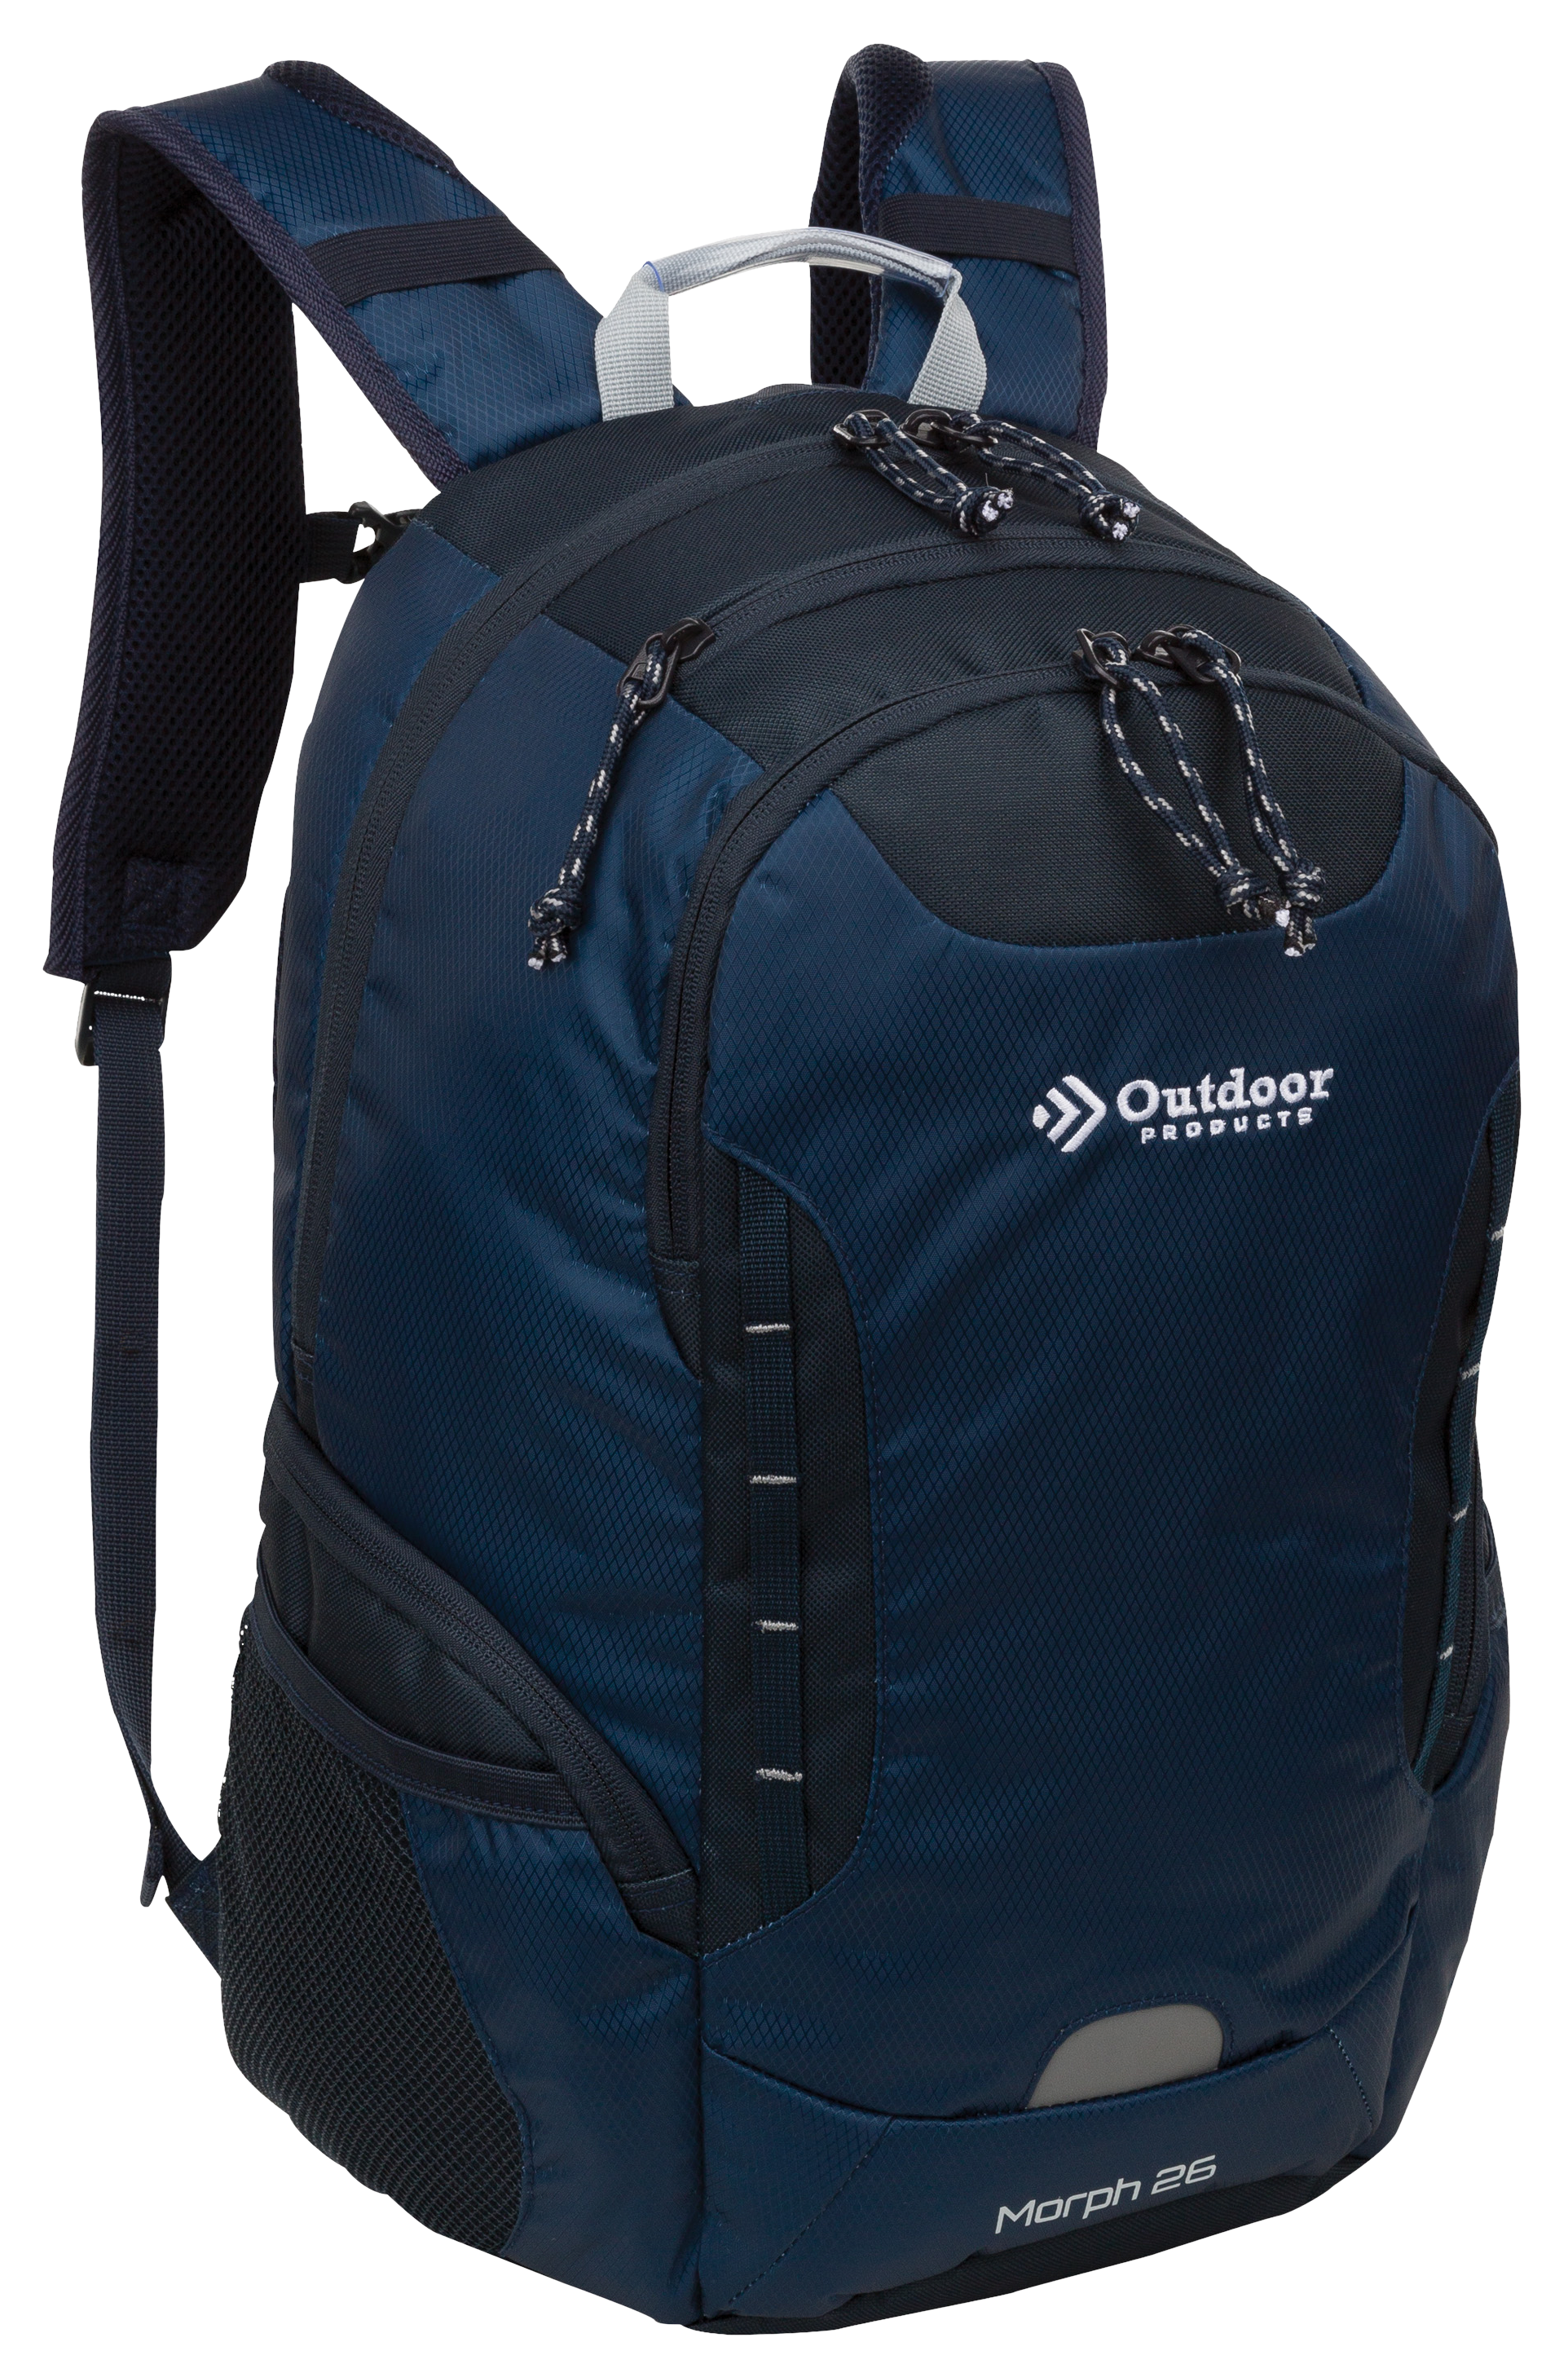 Outdoor Products Morph 27.5L Backpack - Blue